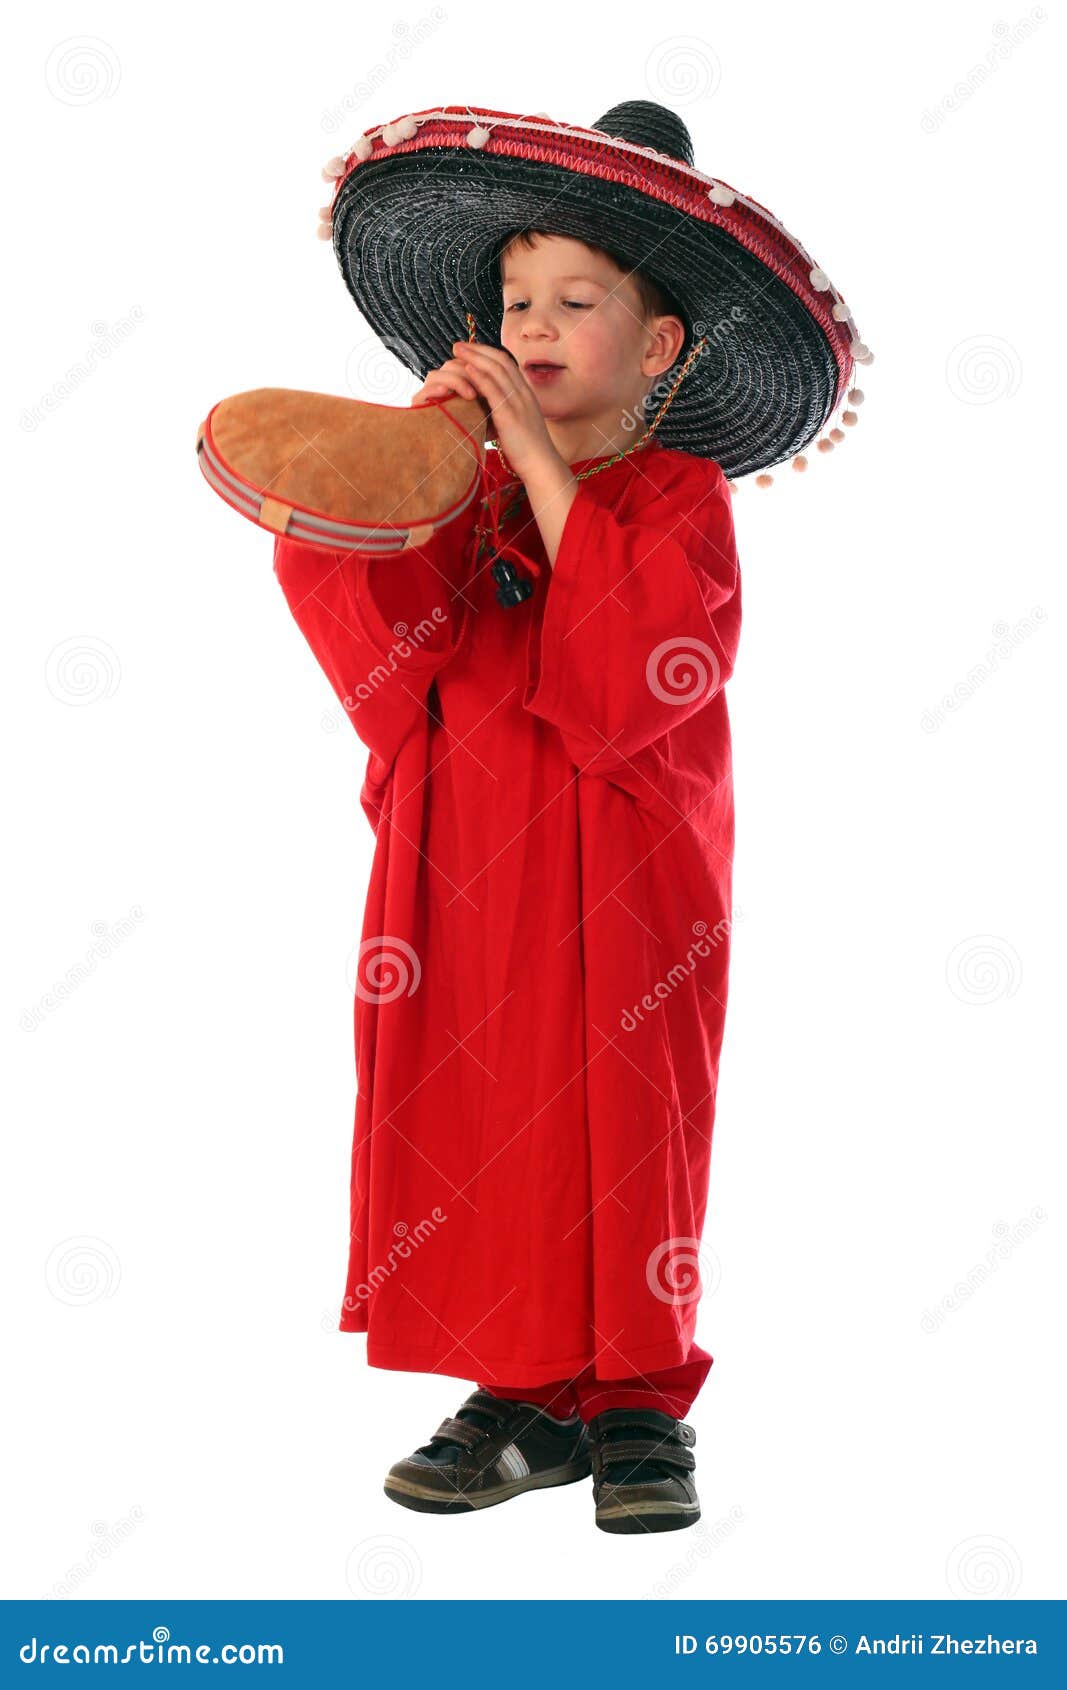 boy in spanish red shirt and sombrero holding bota bag with wine